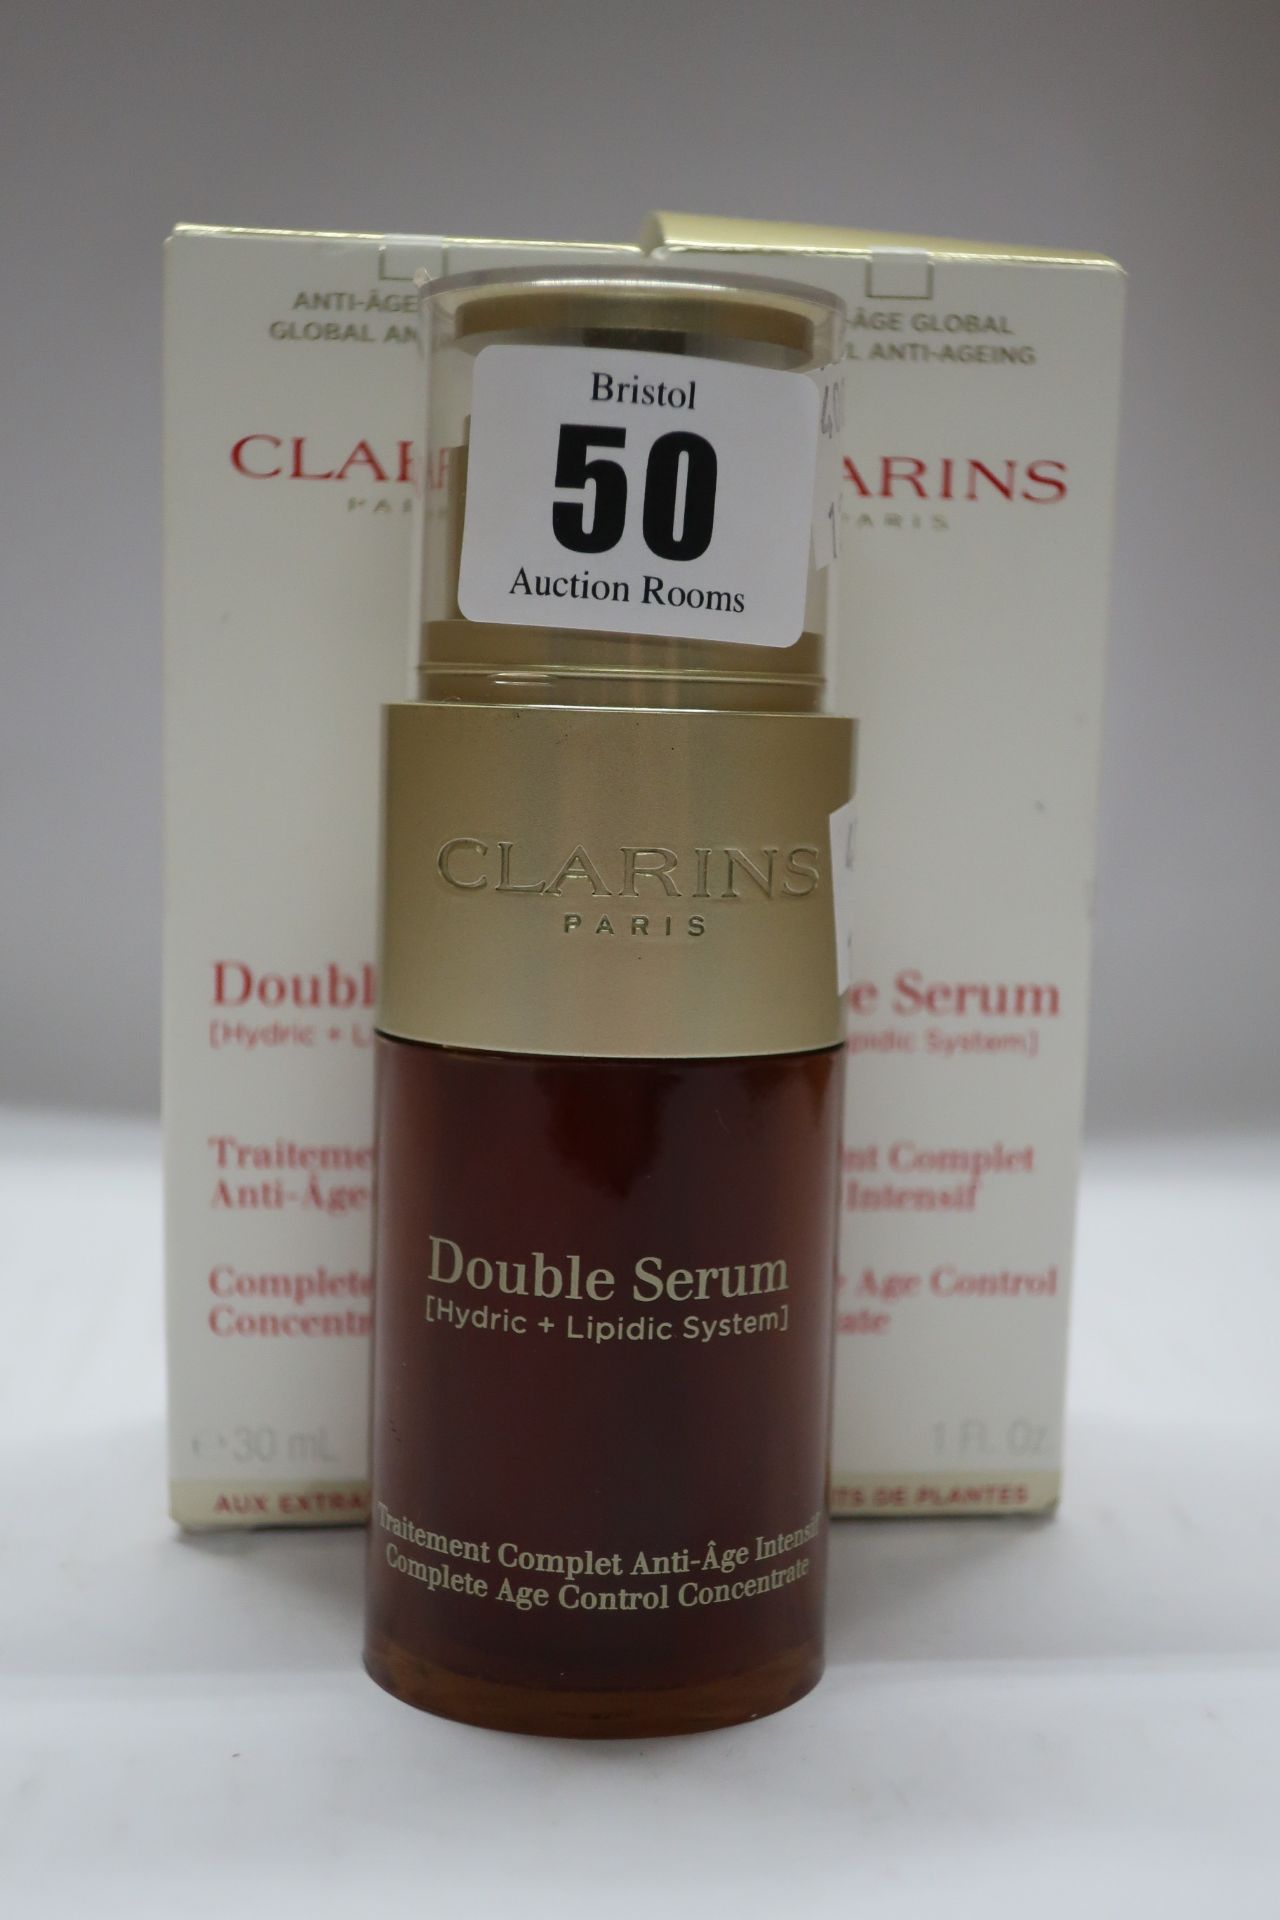 Three Clarins double serum complete age control concentrate (30ml).